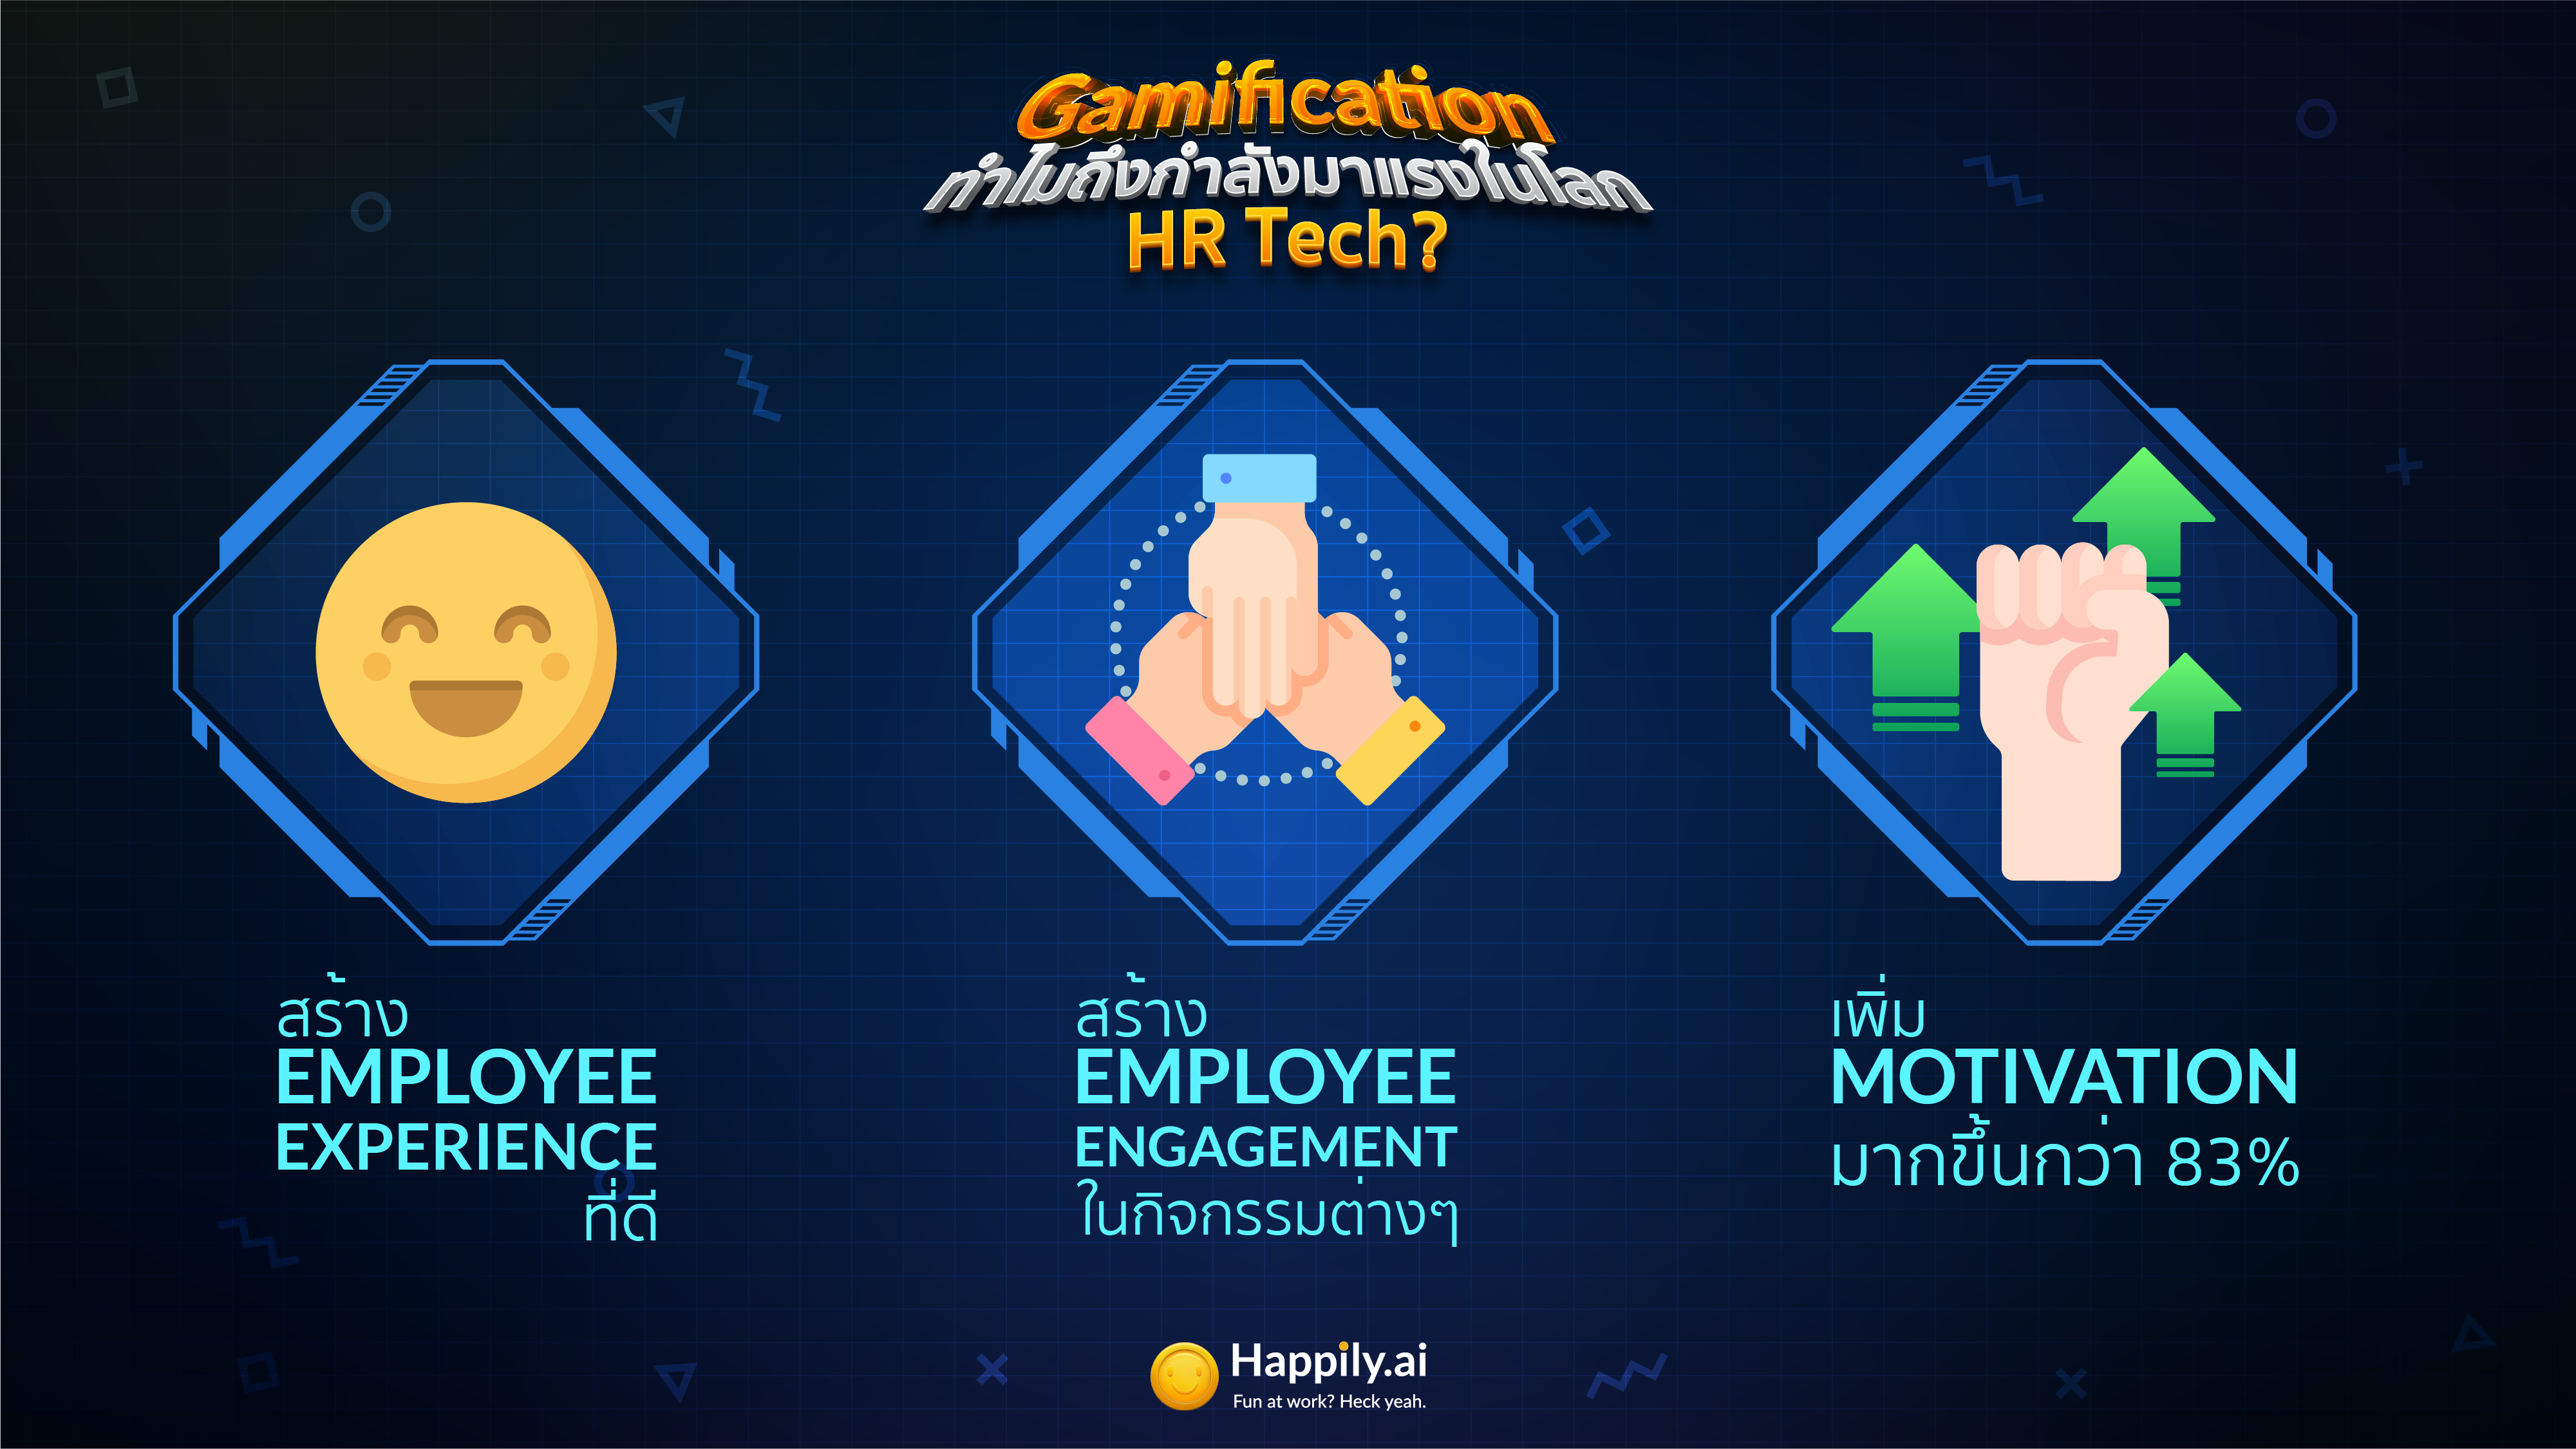 Happily.ai HR Tech Gamification App